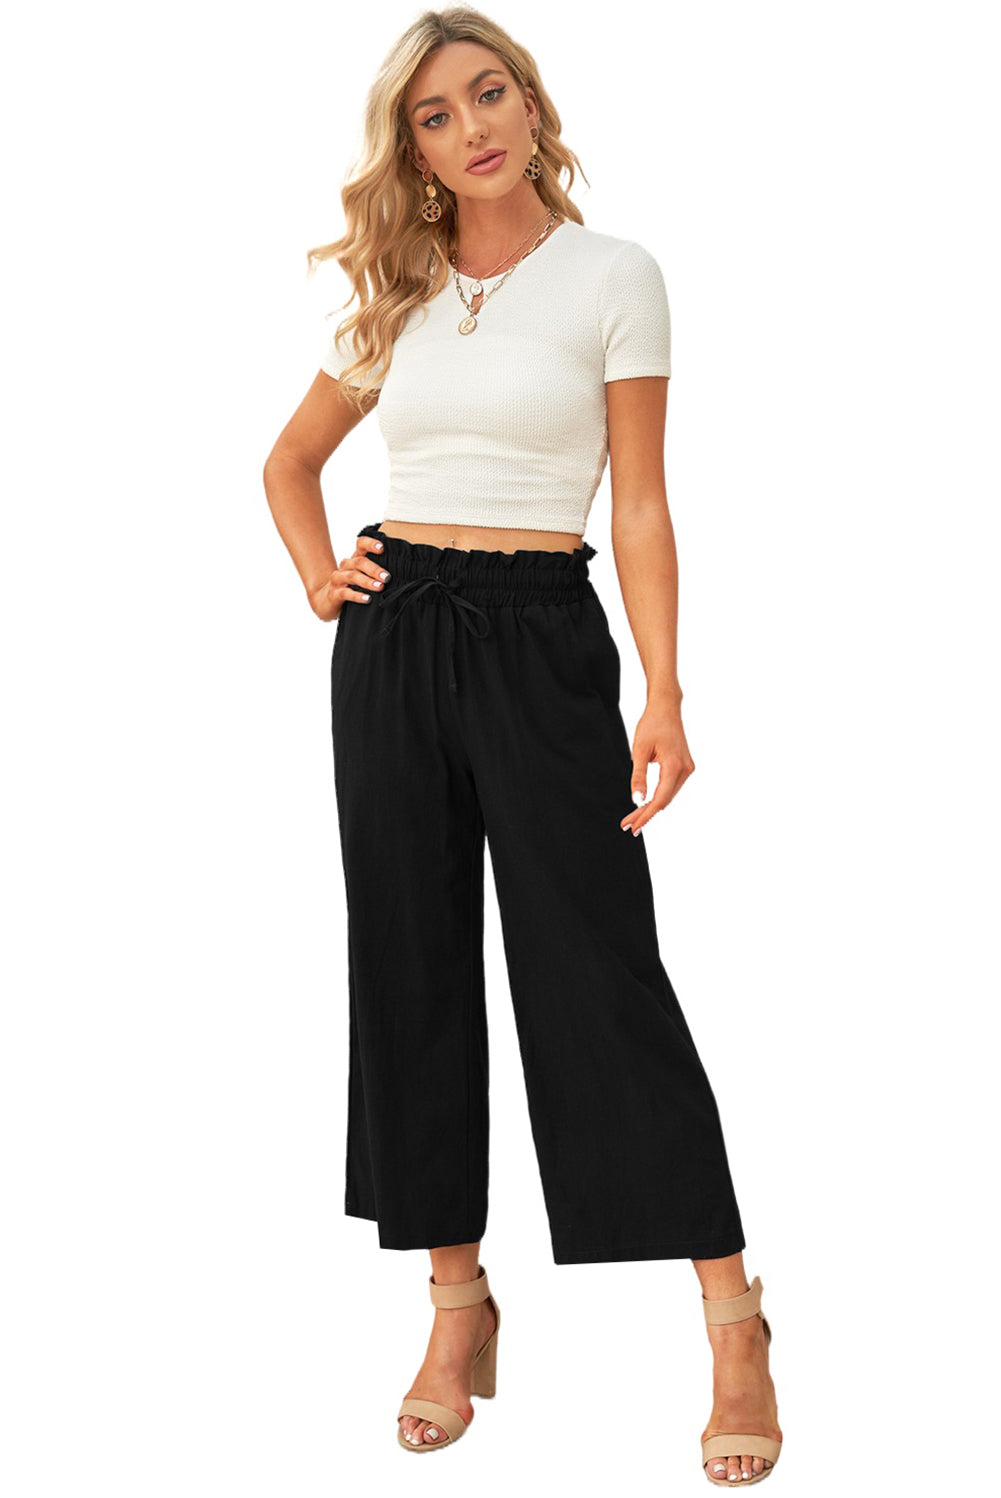 LC771296-2-S, LC771296-2-M, LC771296-2-L, LC771296-2-XL, Black Women's High Waist Paper Bag Straight Leg Cropped Long Pants with Pocket